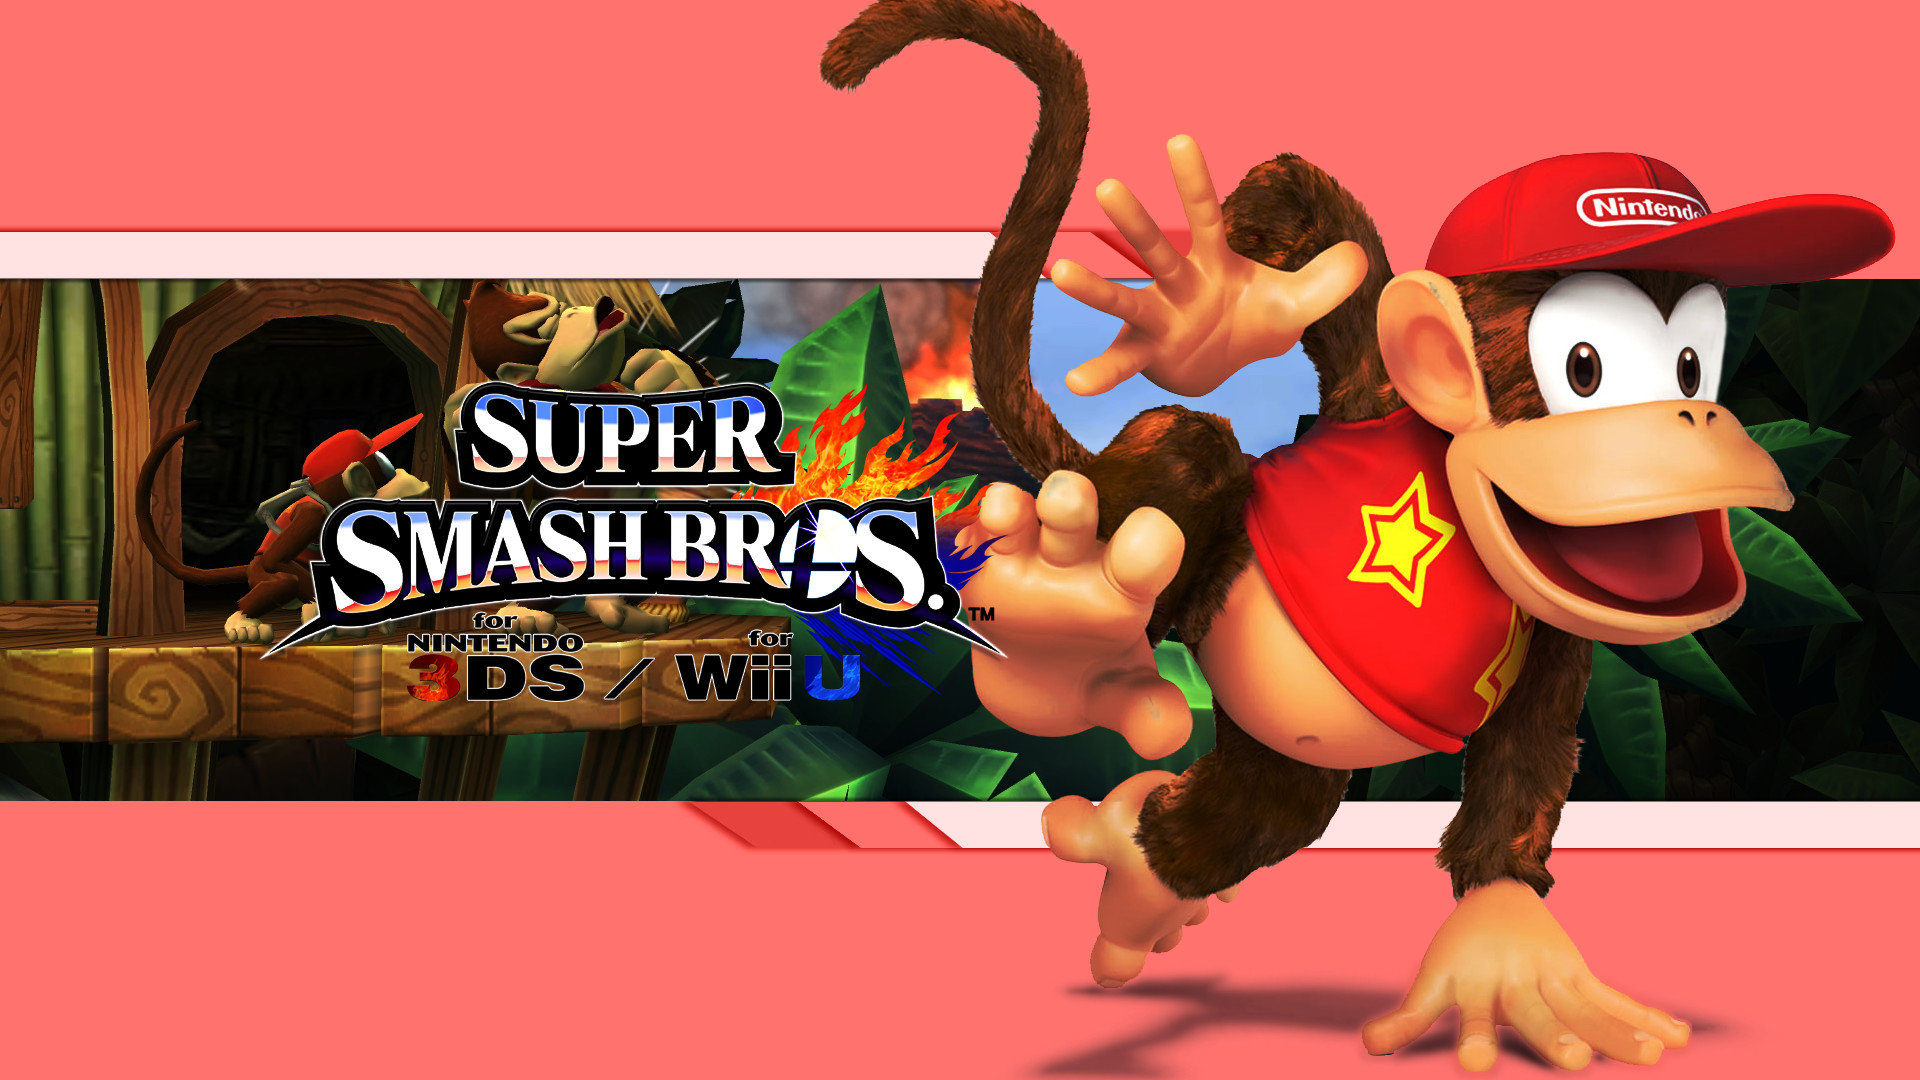 Awesome Super Smash Bros. free wallpaper ID:330747 for hd 1080p computer